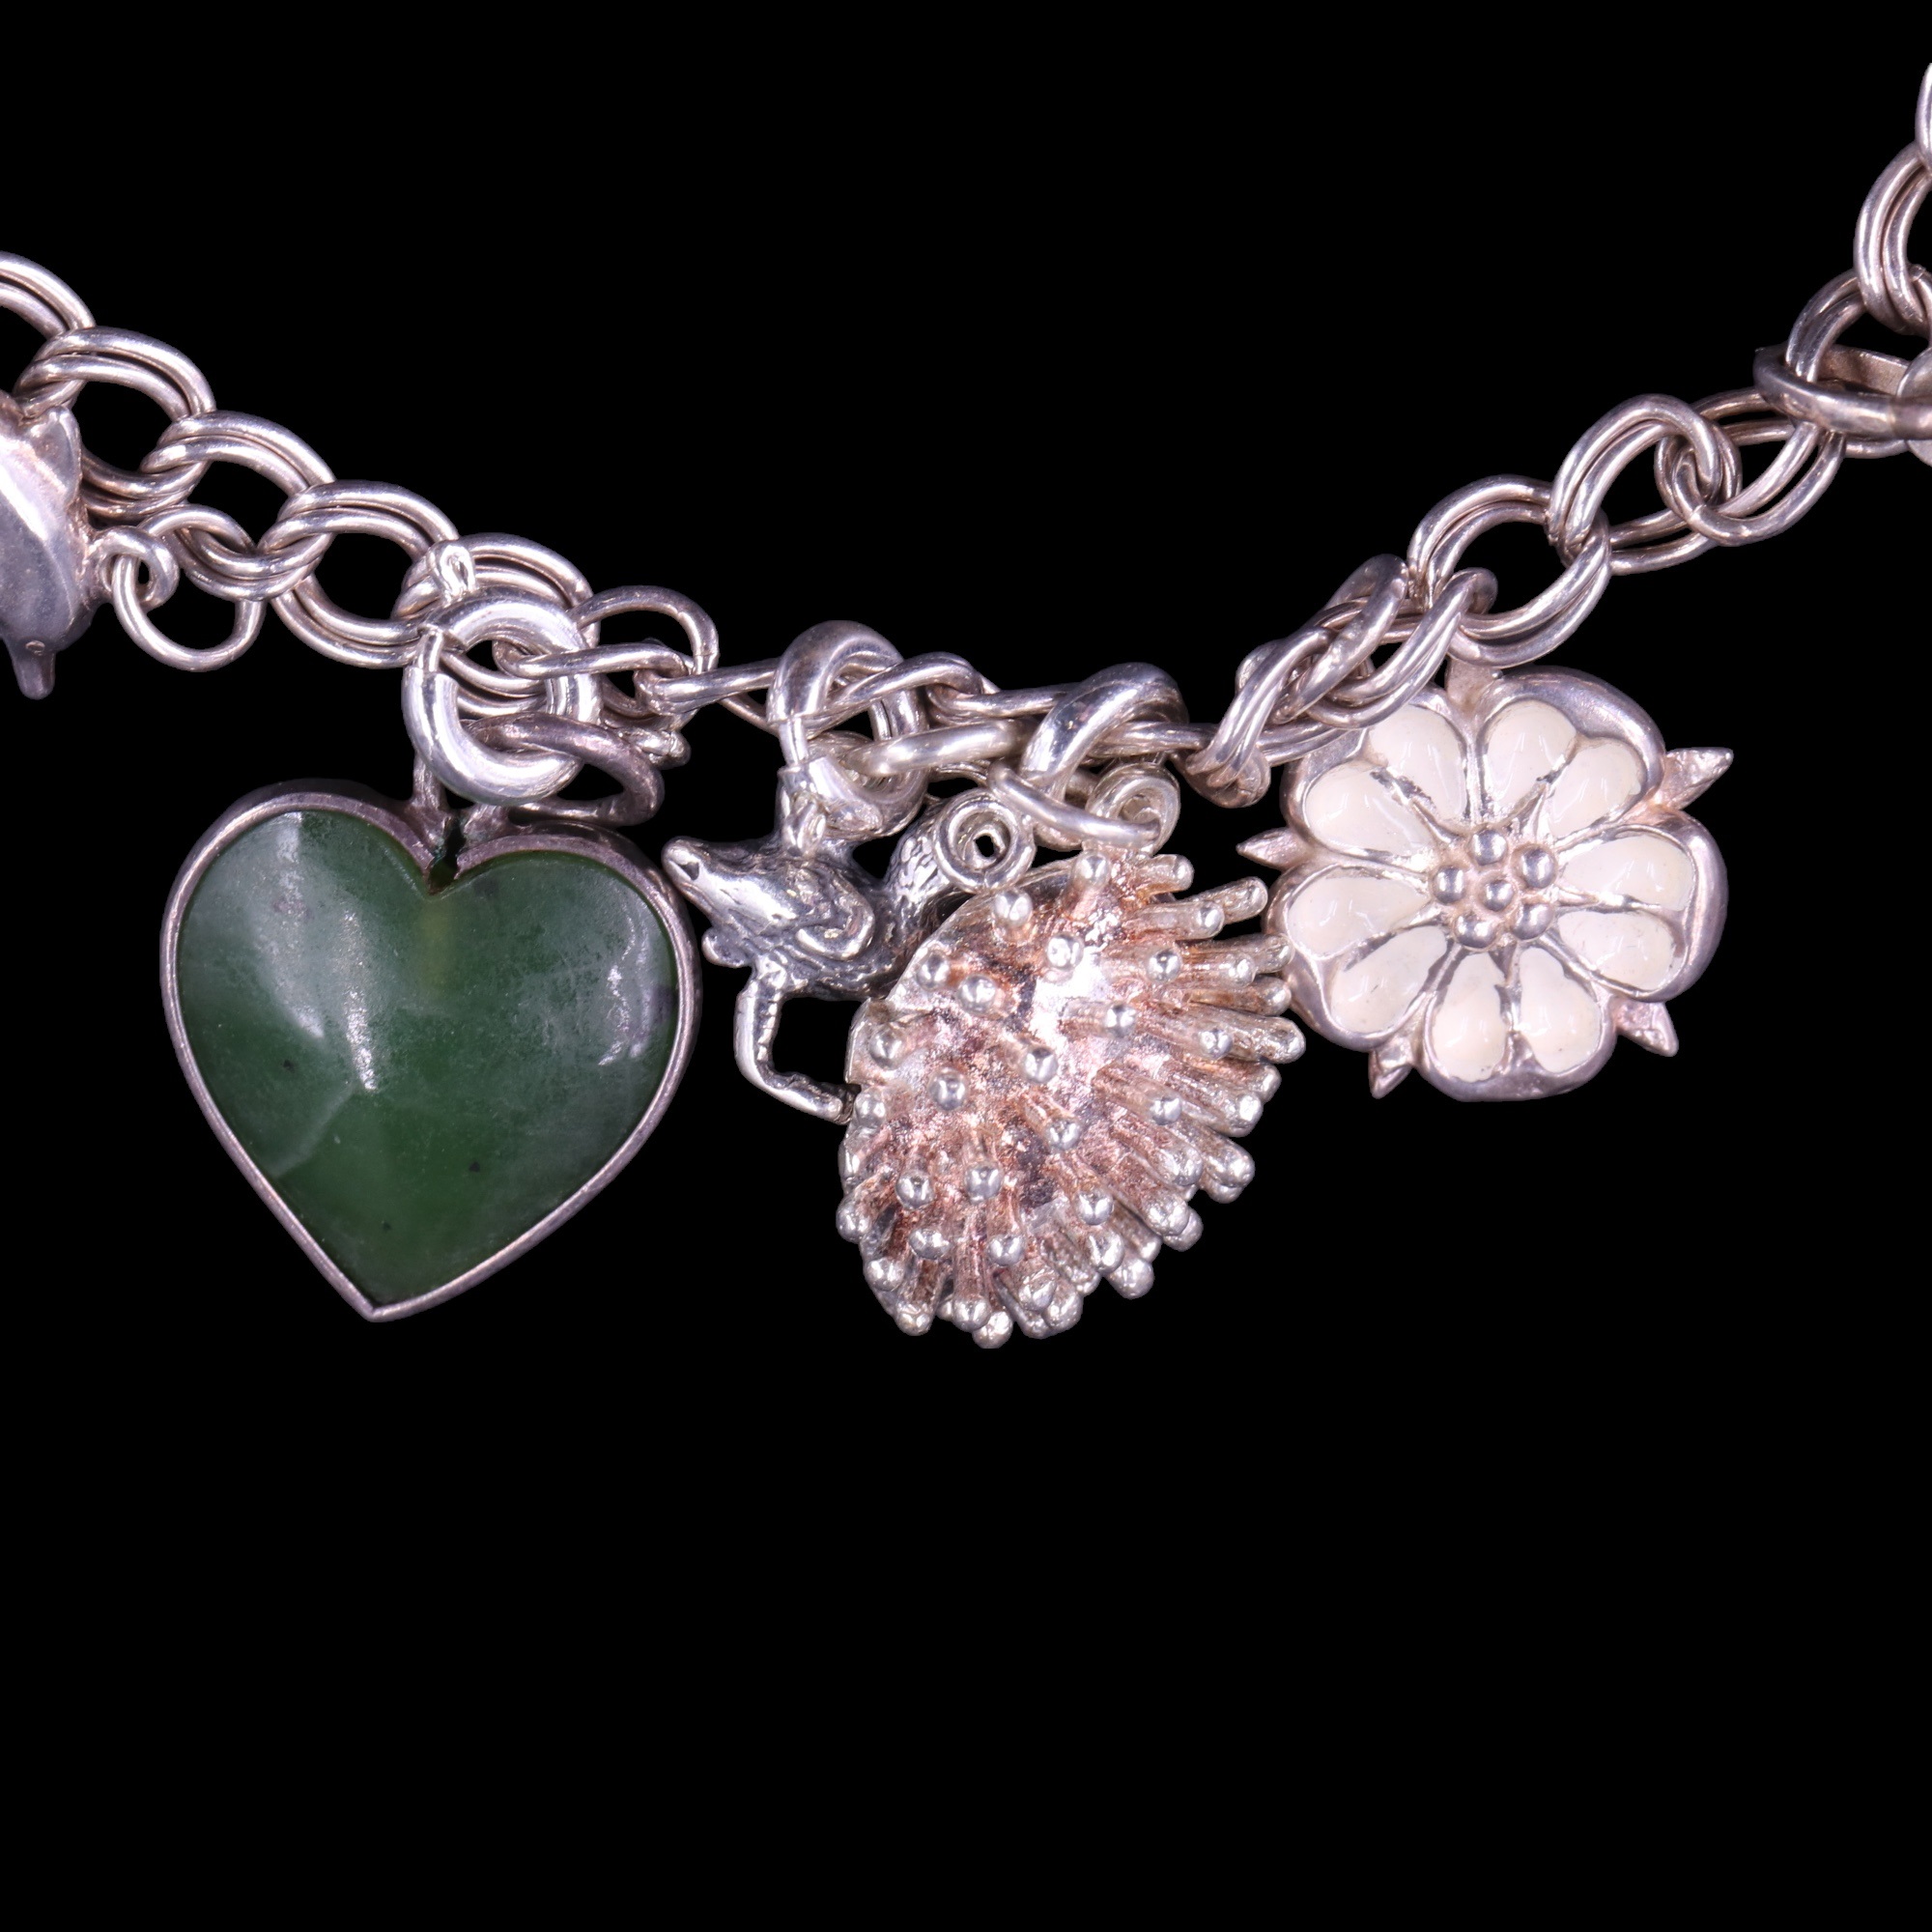 A near-contemporary silver charm bracelet, 47 g - Image 2 of 5